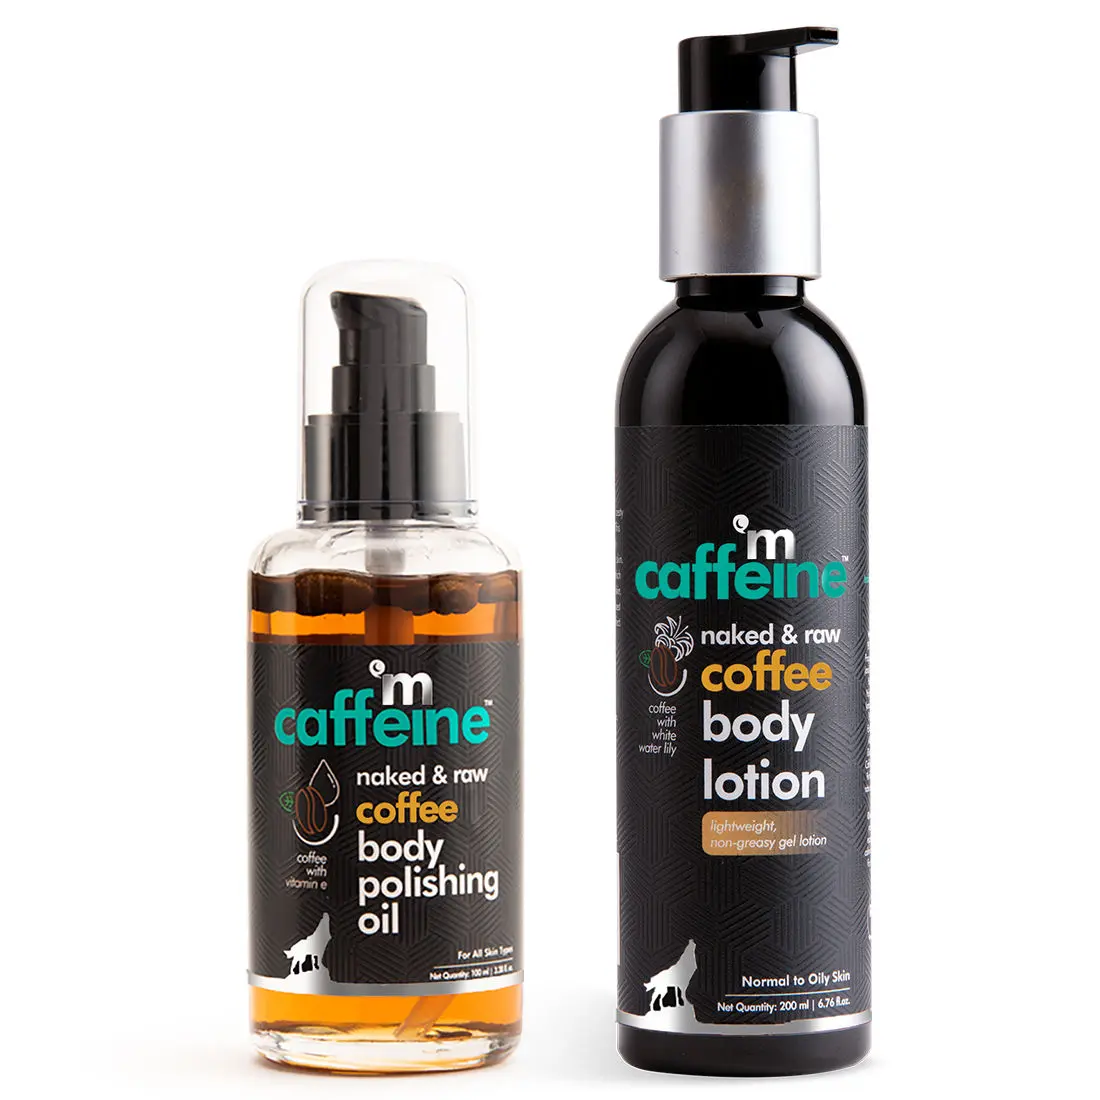 mCaffeine Coffee Double-up Moisturization Set for Winter Dryness | Pre & Post Shower | Nourishes | Body Oil, Body Lotion | Paraben & Mineral Oil Free 300 ml